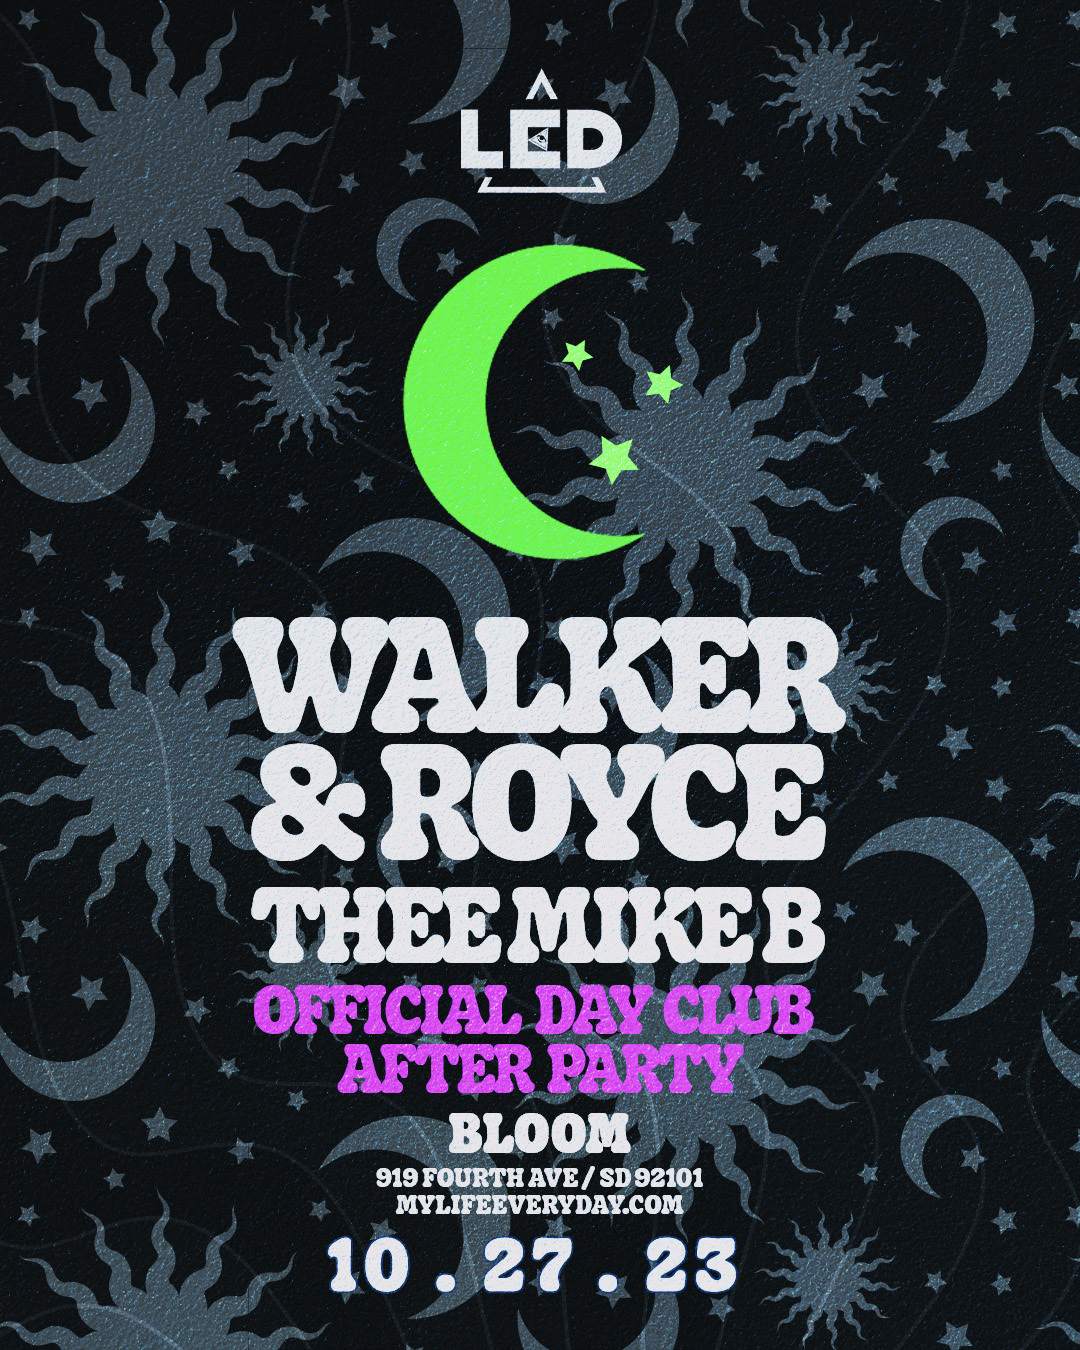 LED presents Walker & Royce + Thee Mike B - フライヤー表